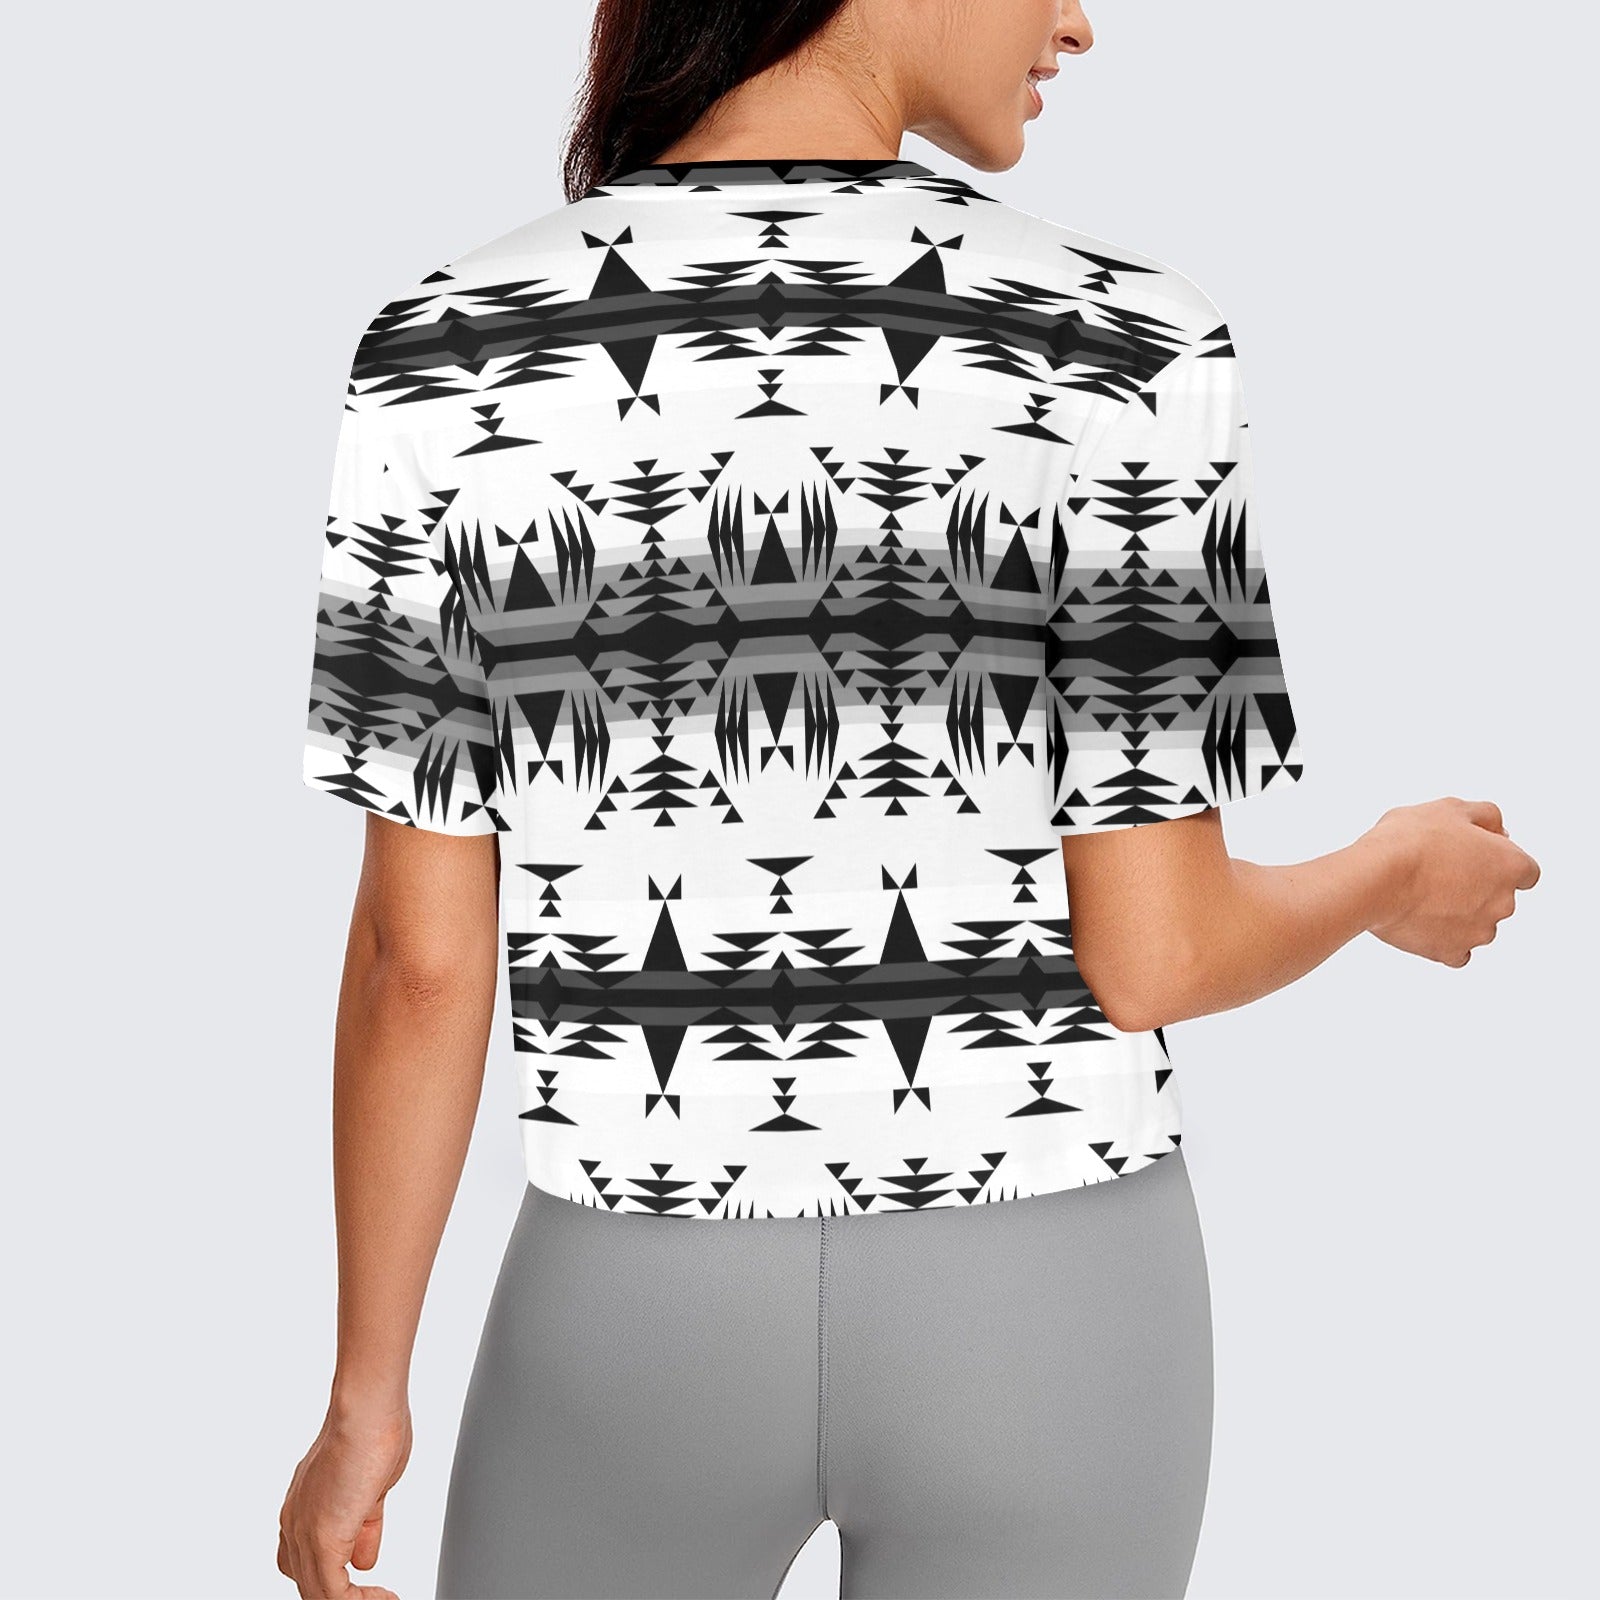 Between the Mountains White and Black Women's Cropped T-shirt